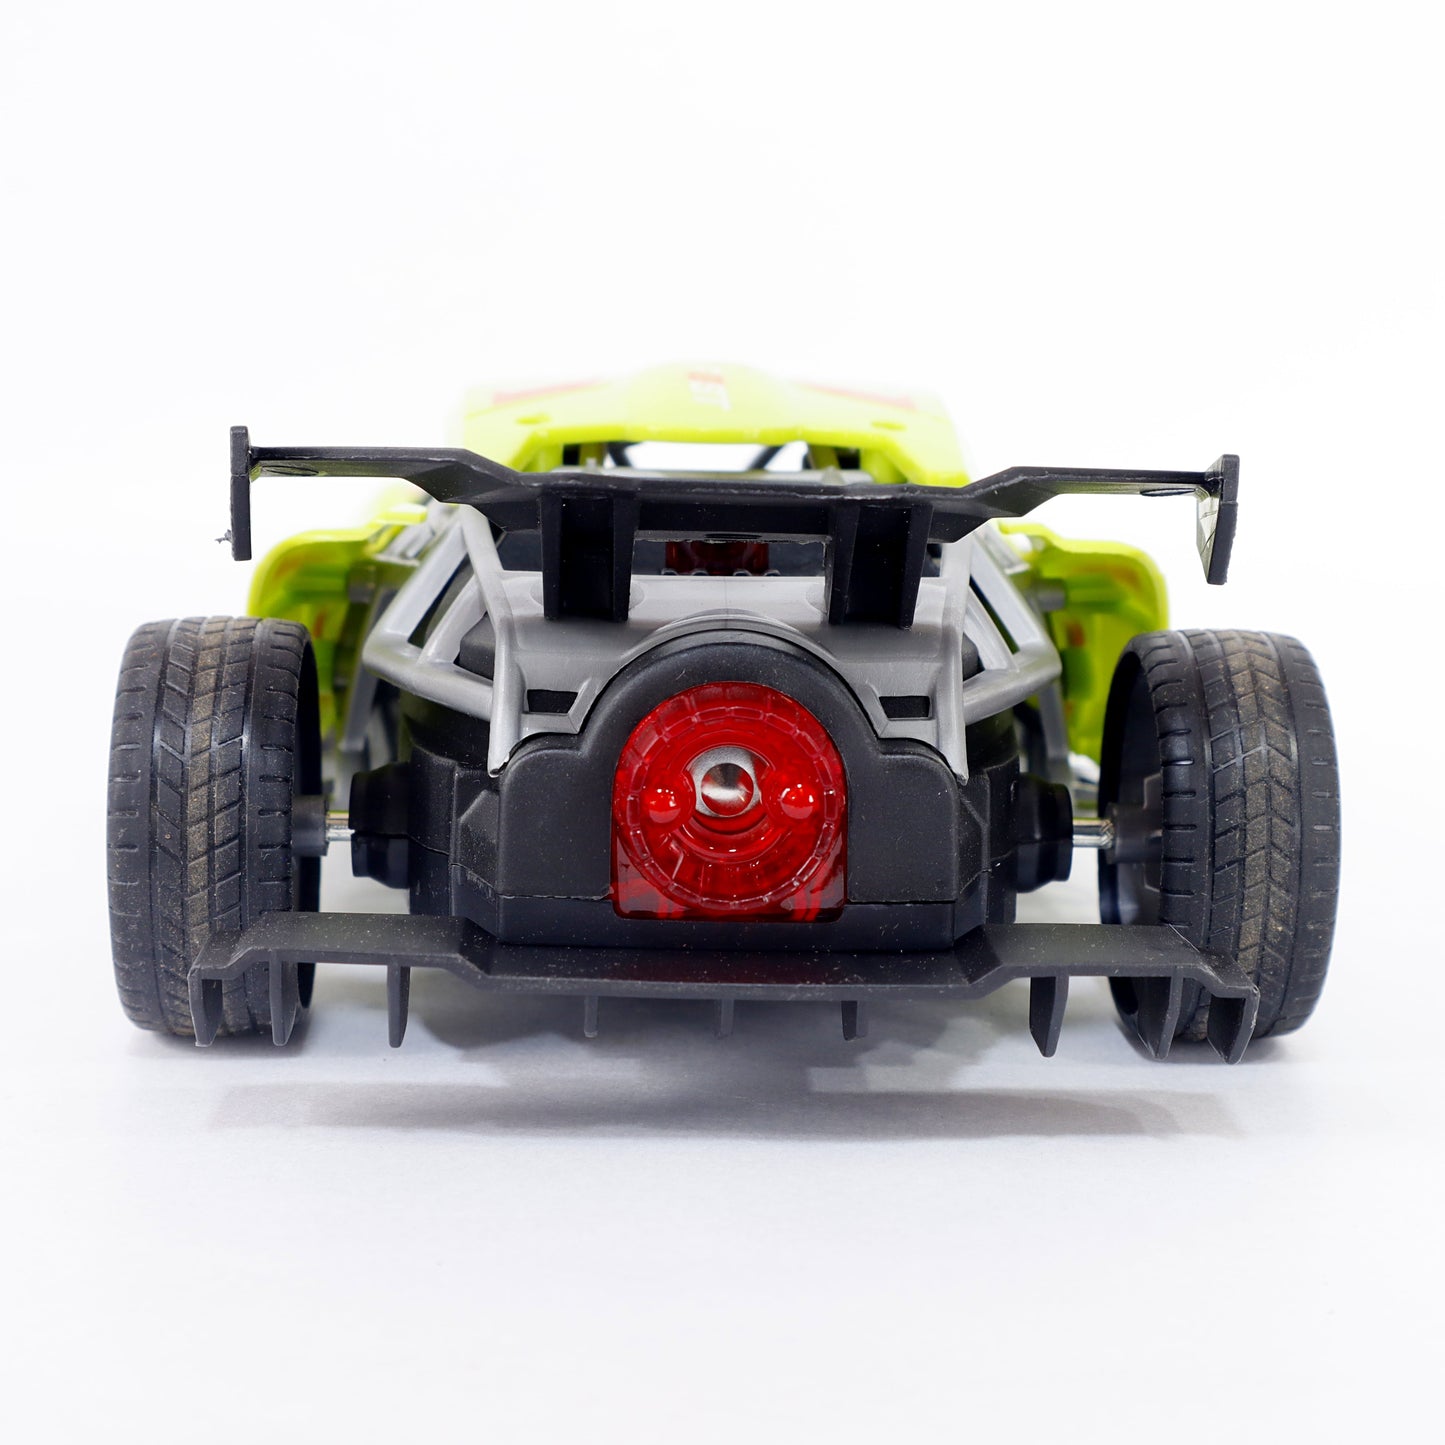 Turbo Smoke-Enabled Sports Racing Car: Safe, Fast, and Full of Thrills! Green Colour